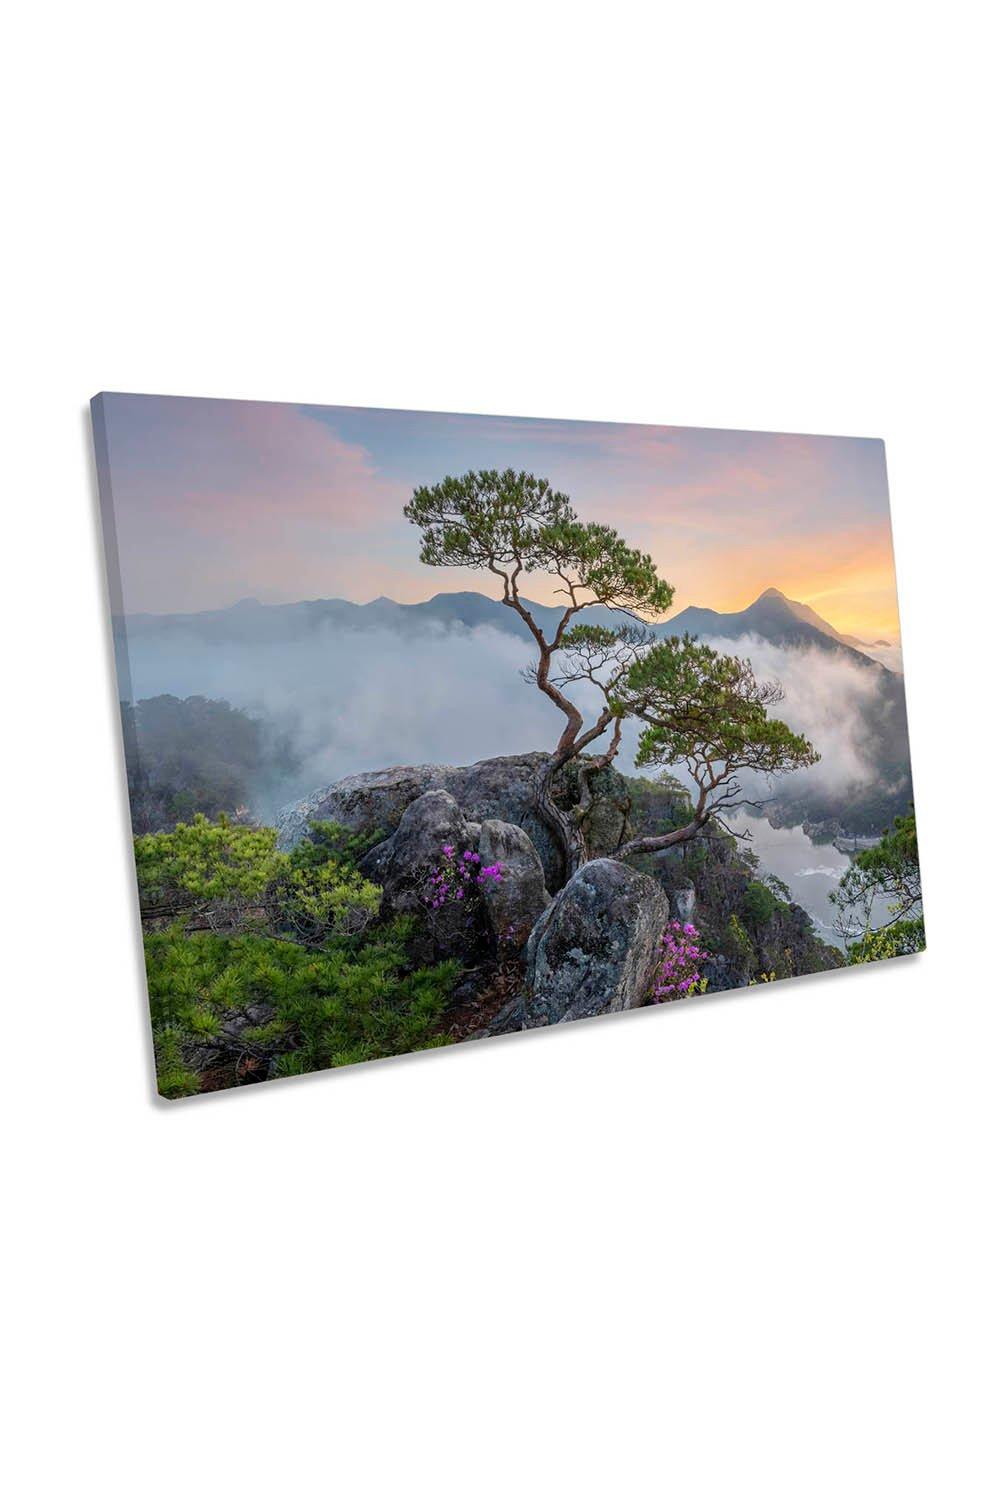 Korean Mountains in Spring Landscape Canvas Wall Art Picture Print